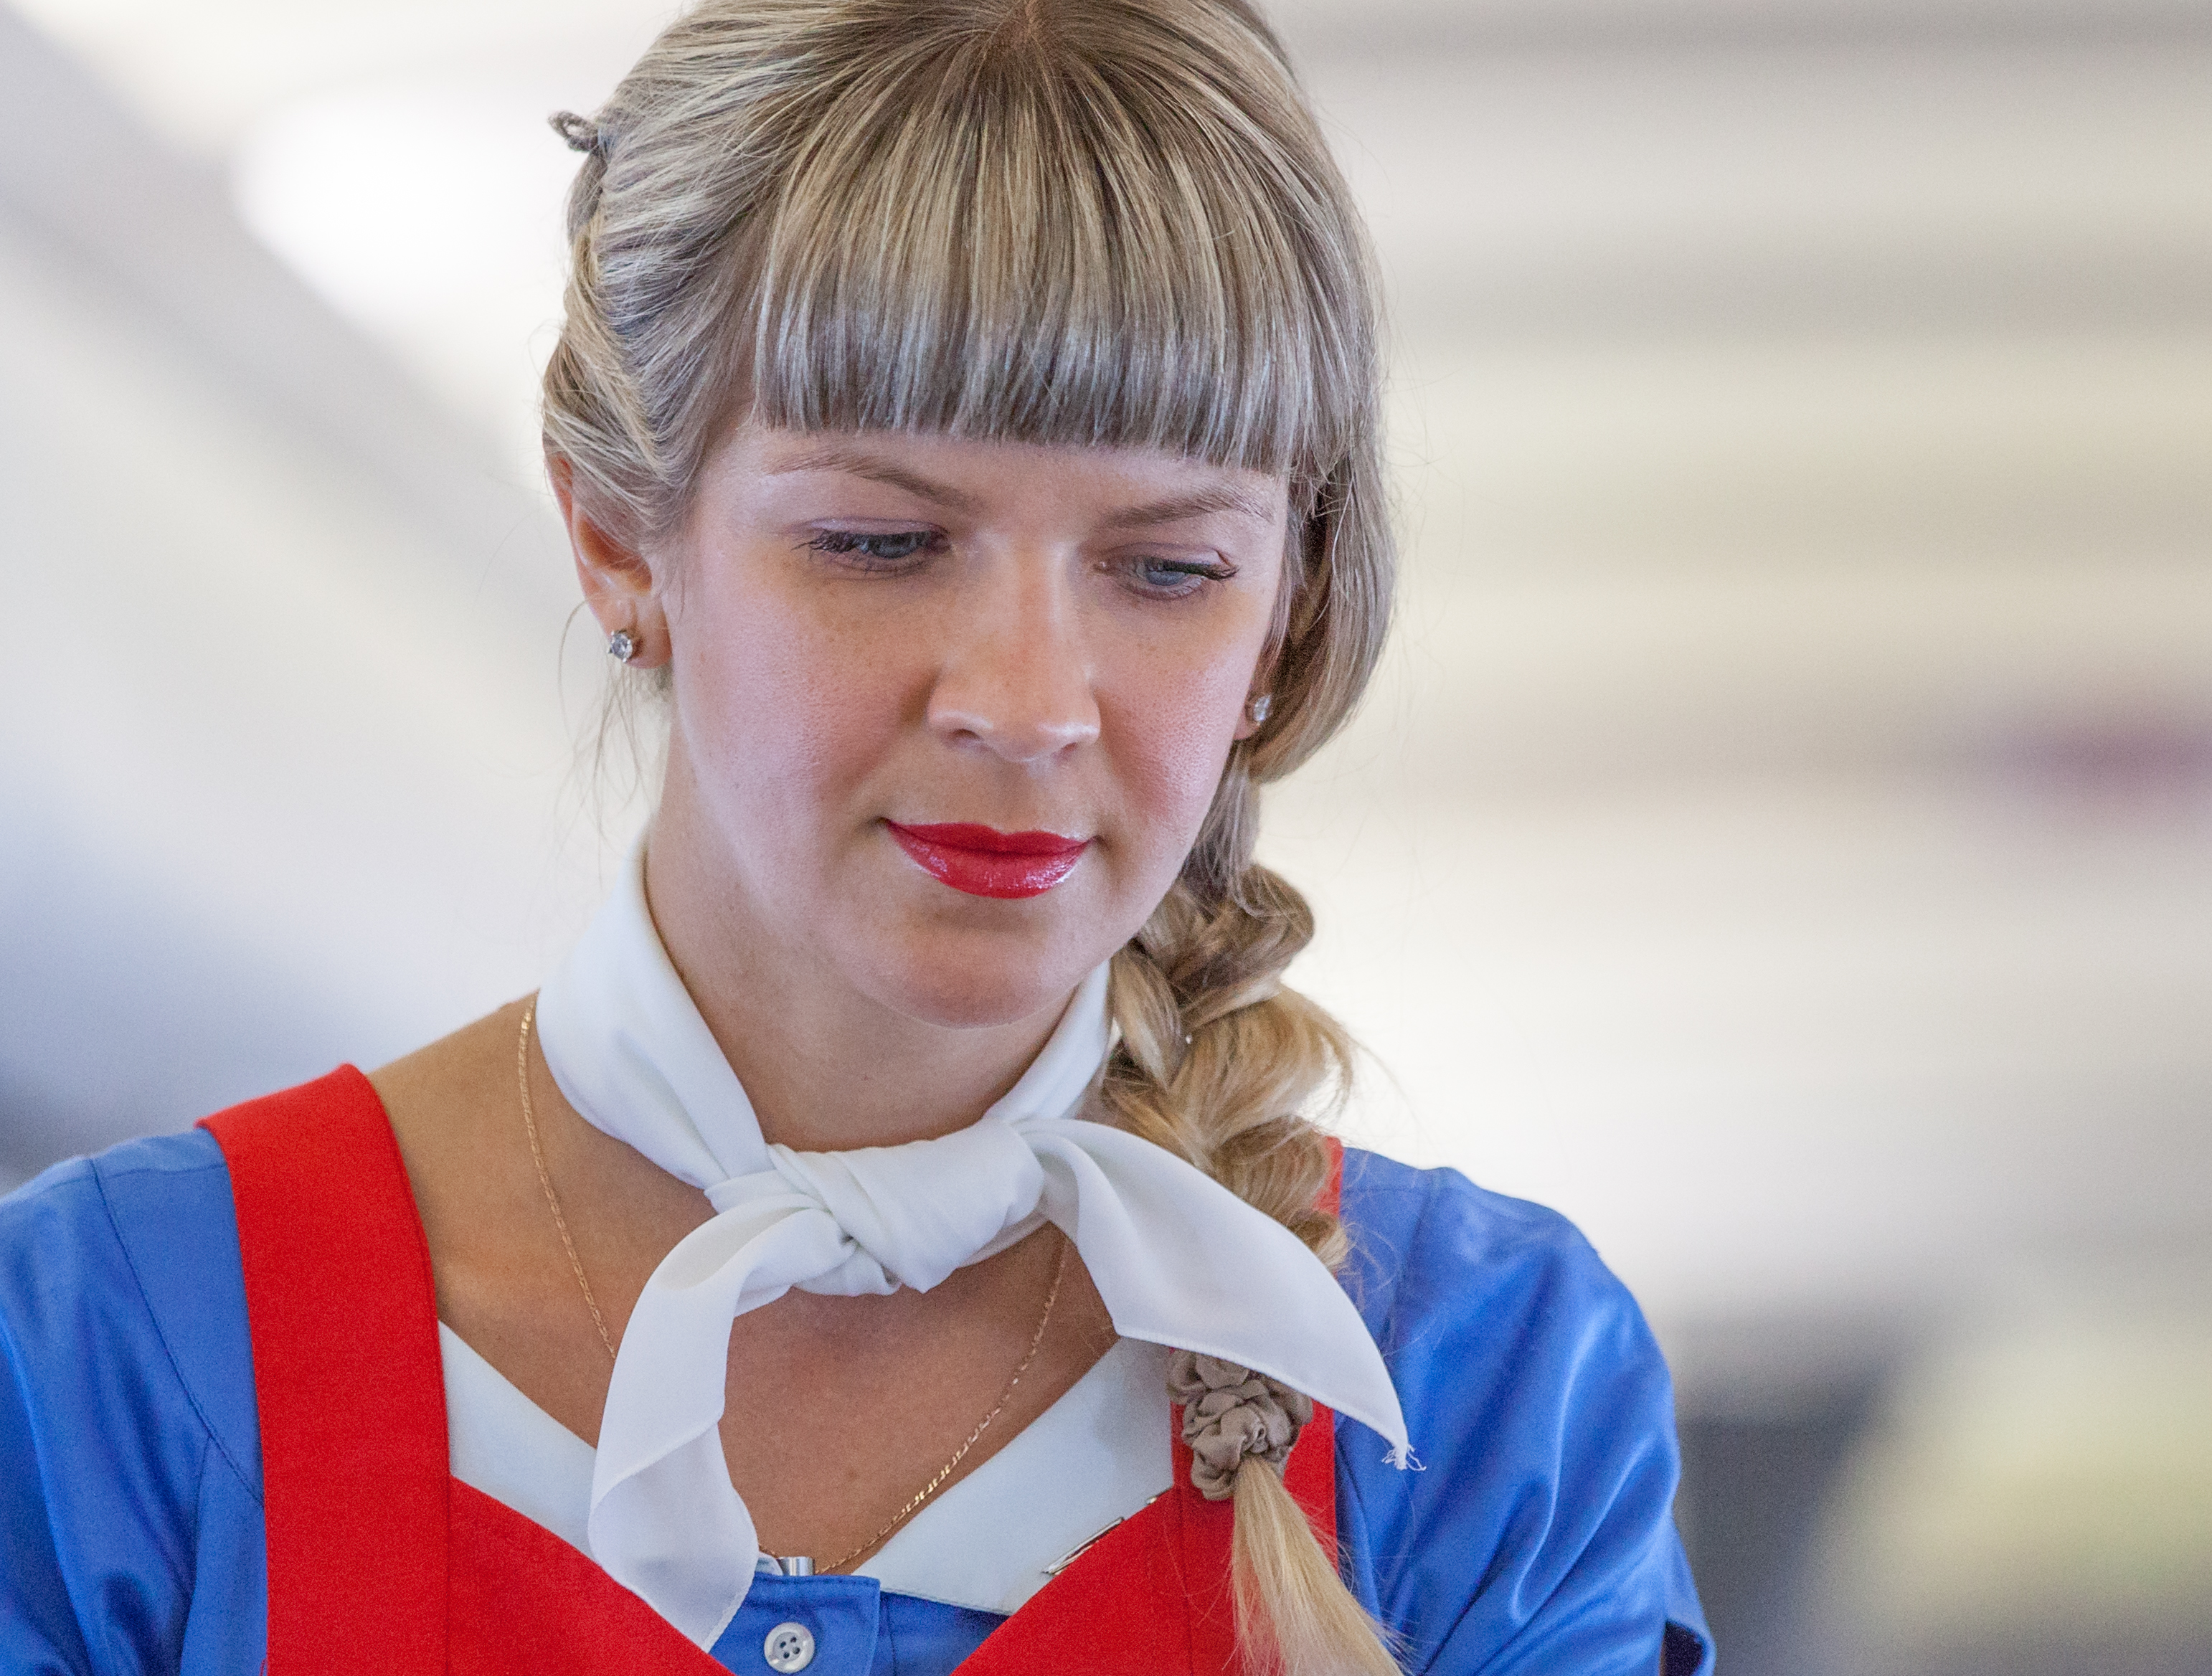 a cute stewardess photographed in August 2014, photo 2/2